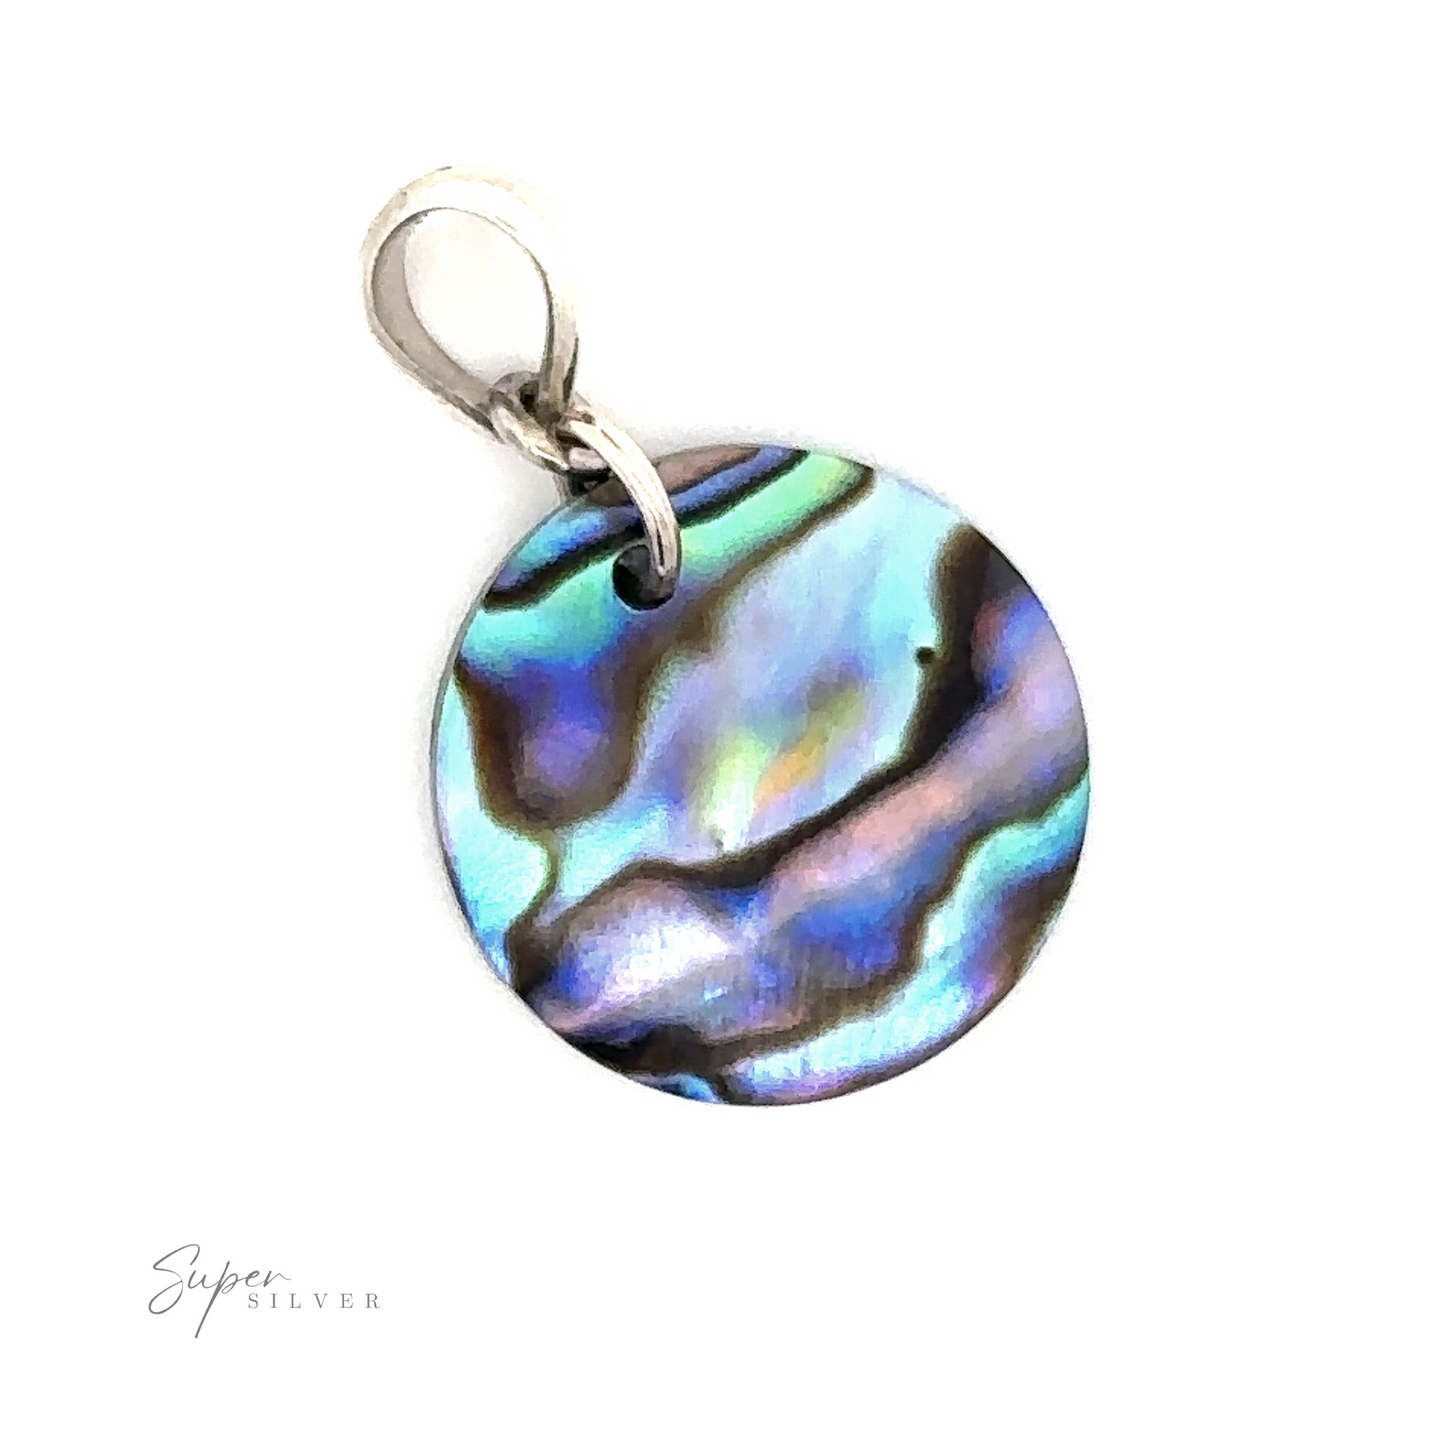 
                  
                    A round Charming Abalone Pendant with a metallic loop, displaying iridescent blue, green, and purple hues on a white background. An exquisite piece of ocean-inspired jewelry, it boasts the text "Super Silver" on the bottom-left corner.
                  
                